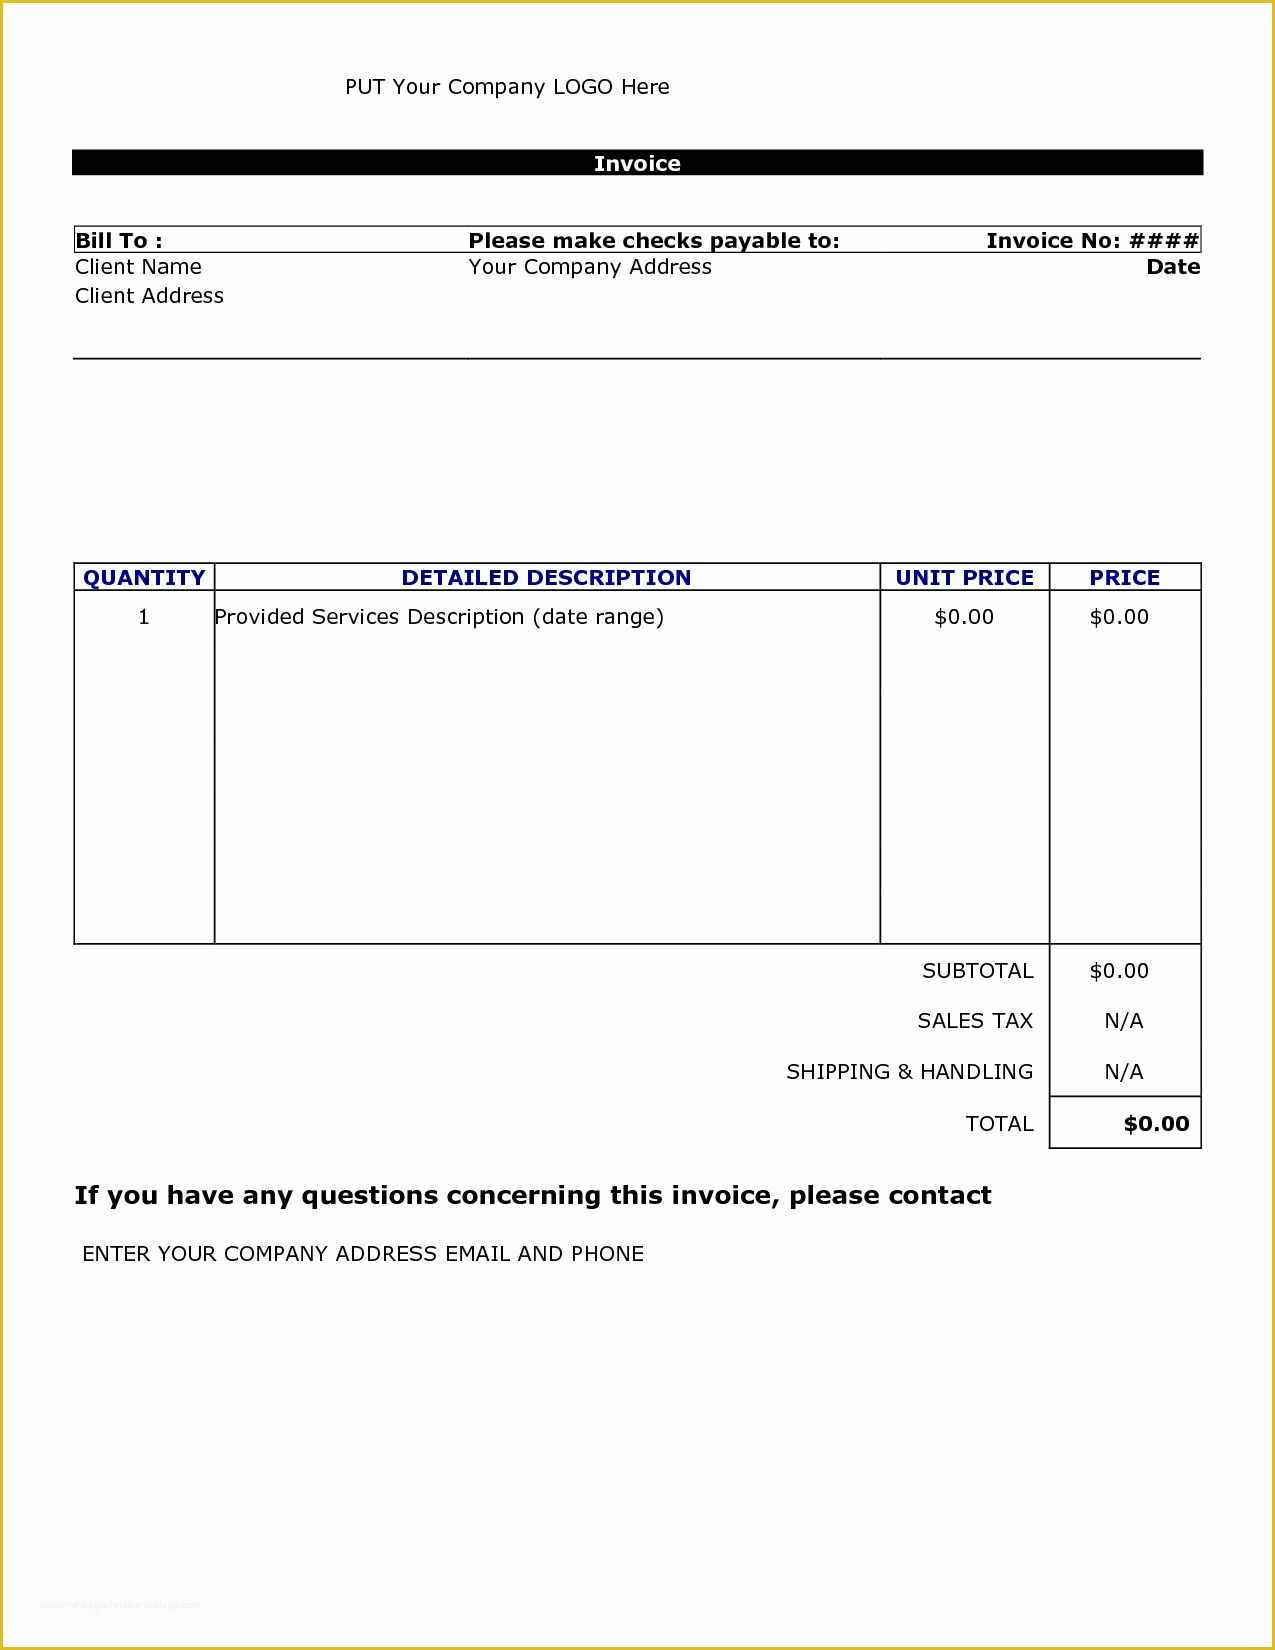 Microsoft Word Invoice Template Free Of Invoice Template Word 2010